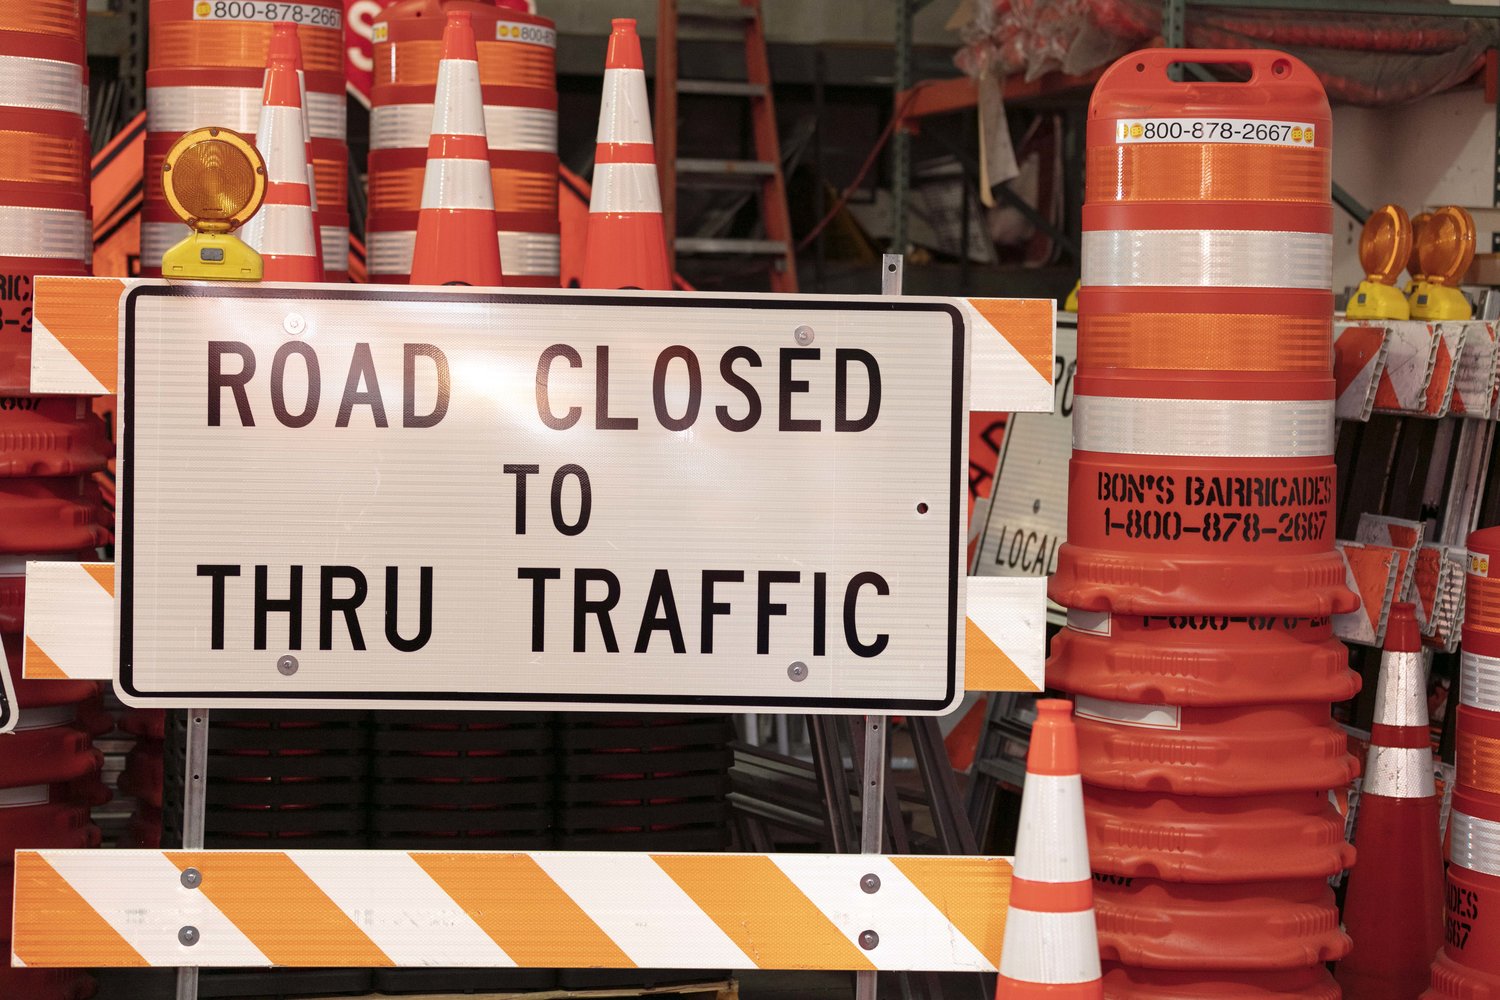 Plain “Road closed to thru traffic” signage in front of stacks of traffic cones and barricades